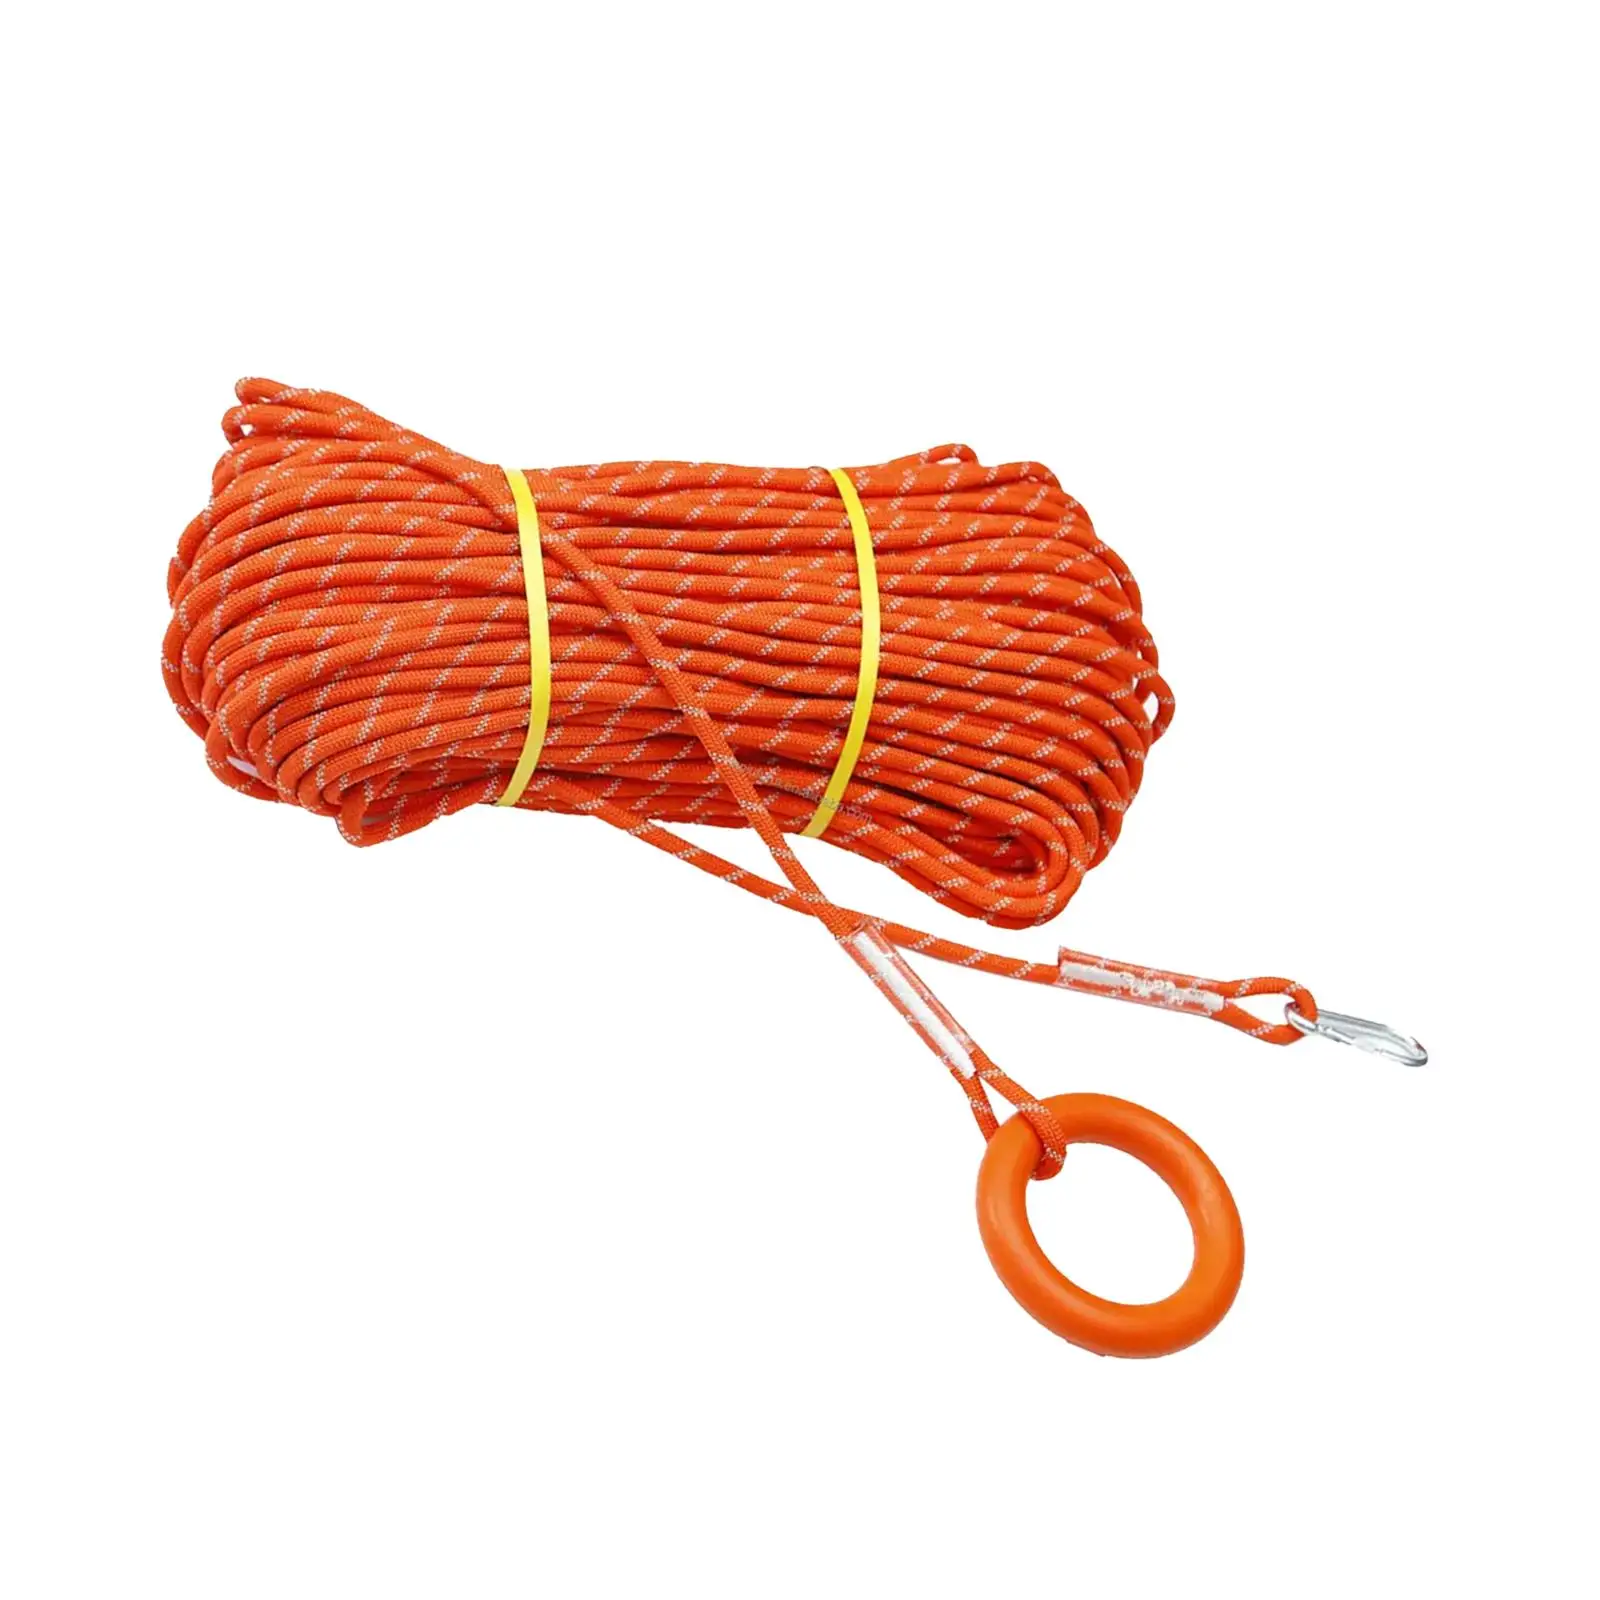 Water Floating Lifesaving Reflective Rope Professional Outdoor for Sailing